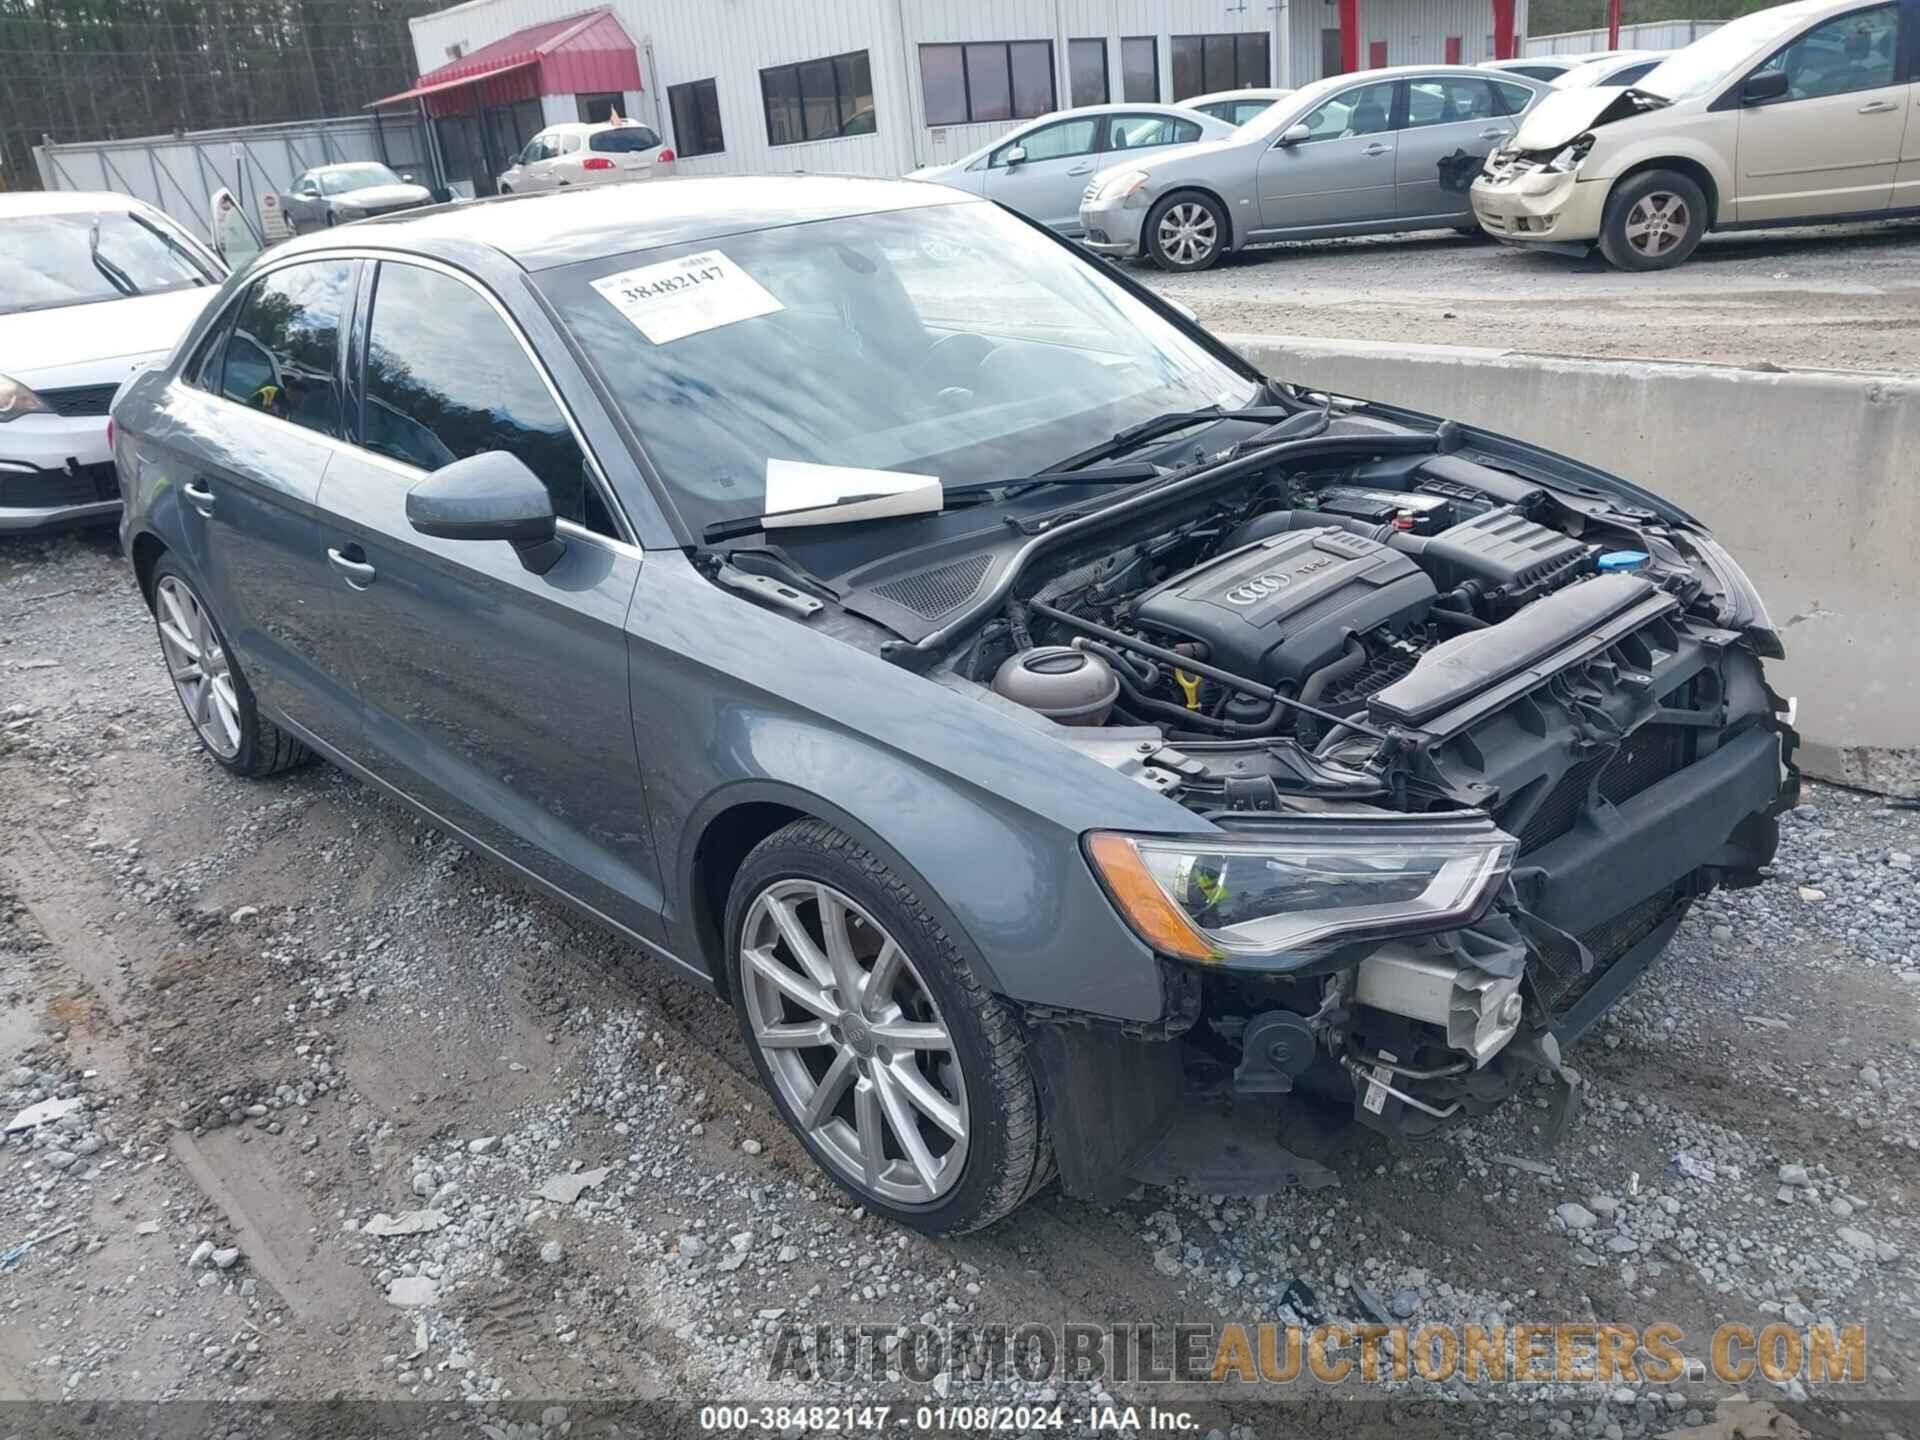 WAUCCGFFXF1010544 AUDI A3 2015